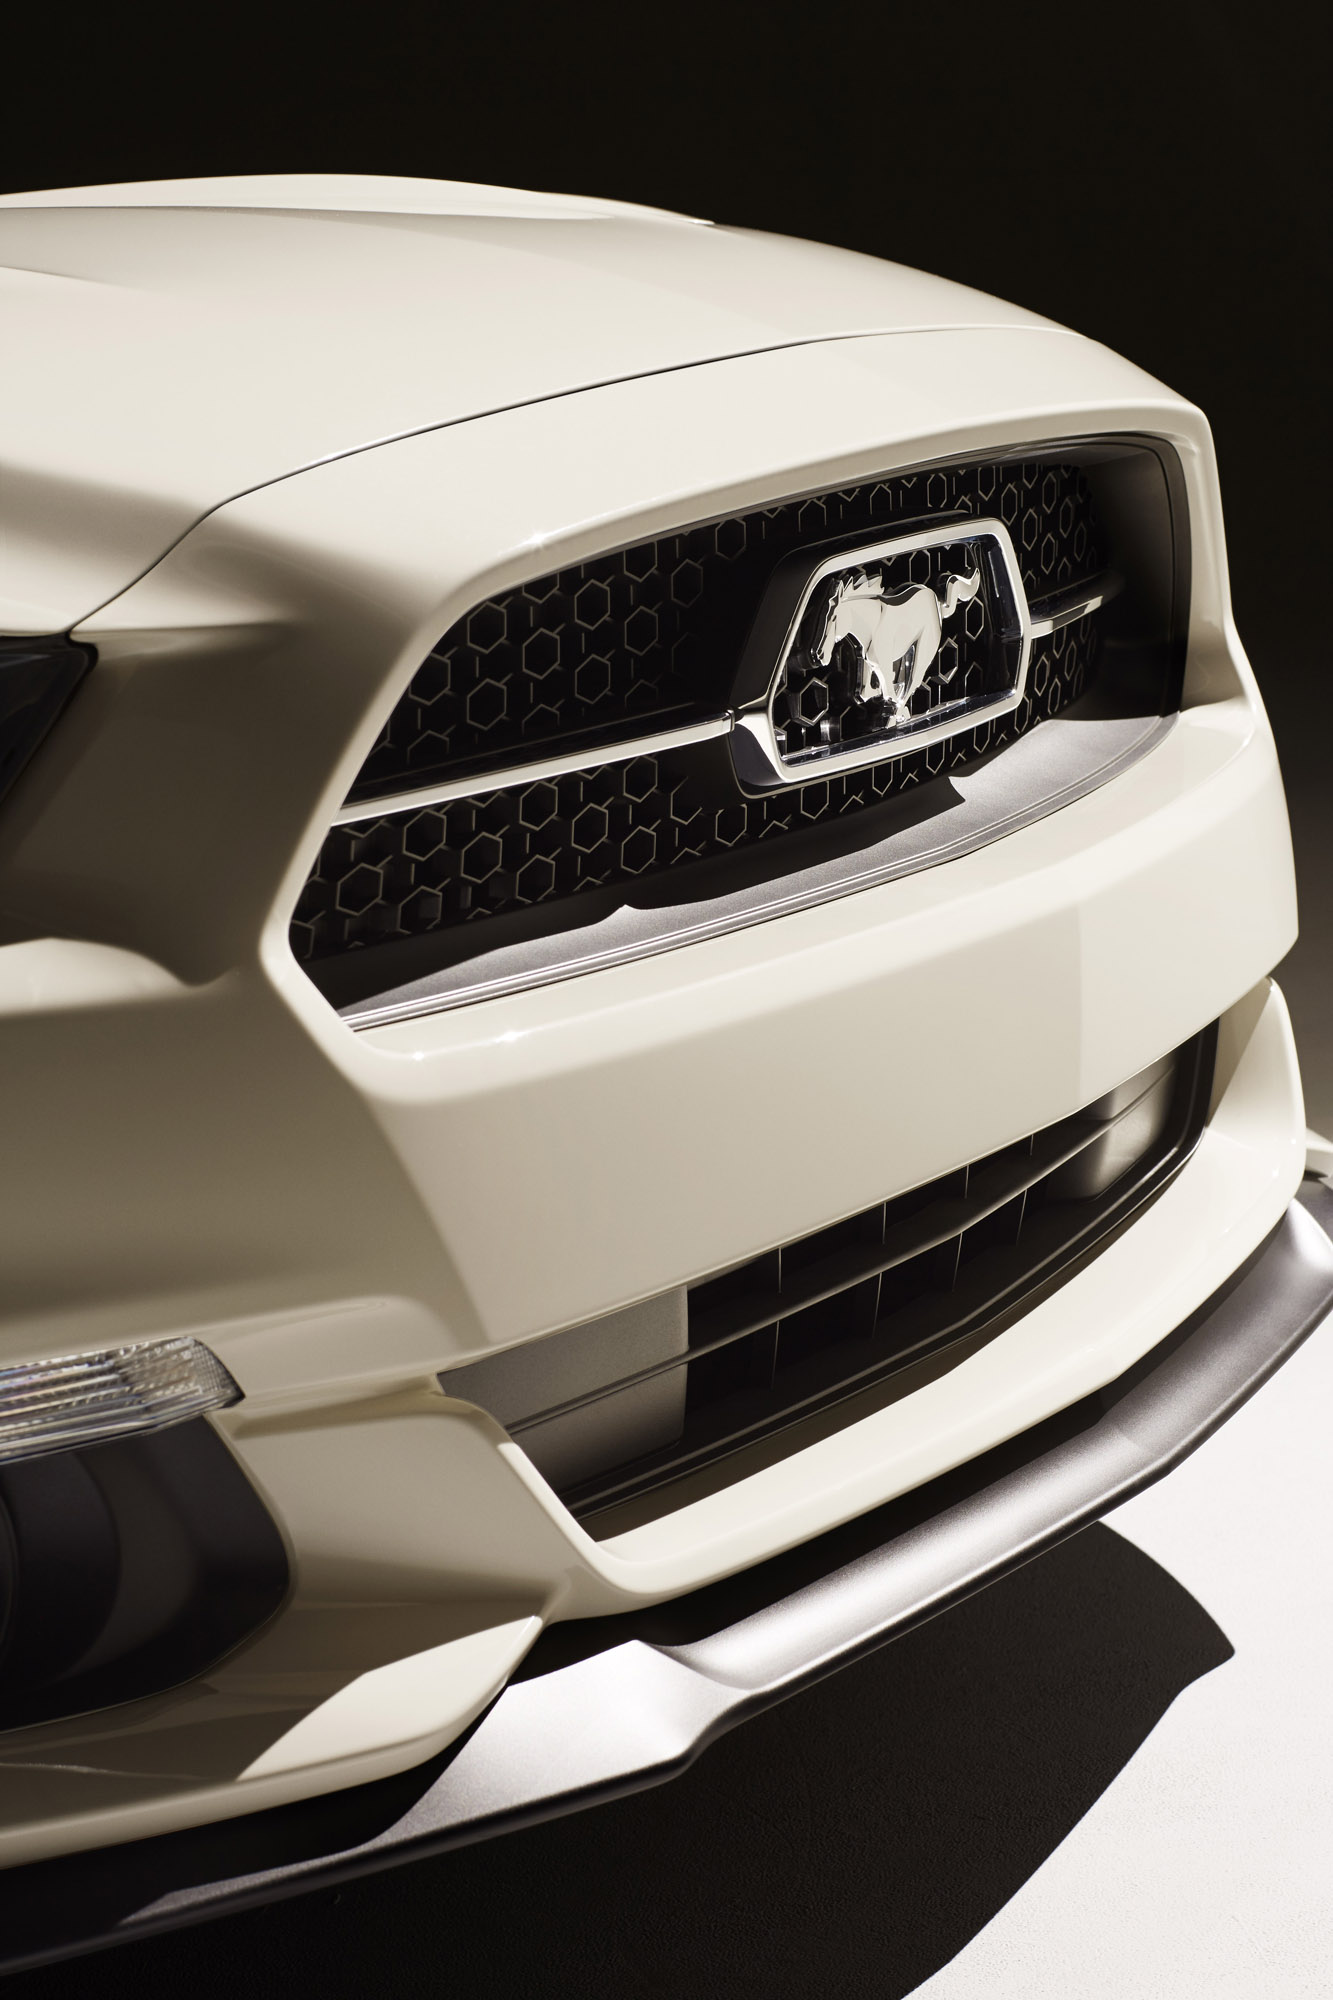 Ford Mustang GT 50 Year Limited Edition